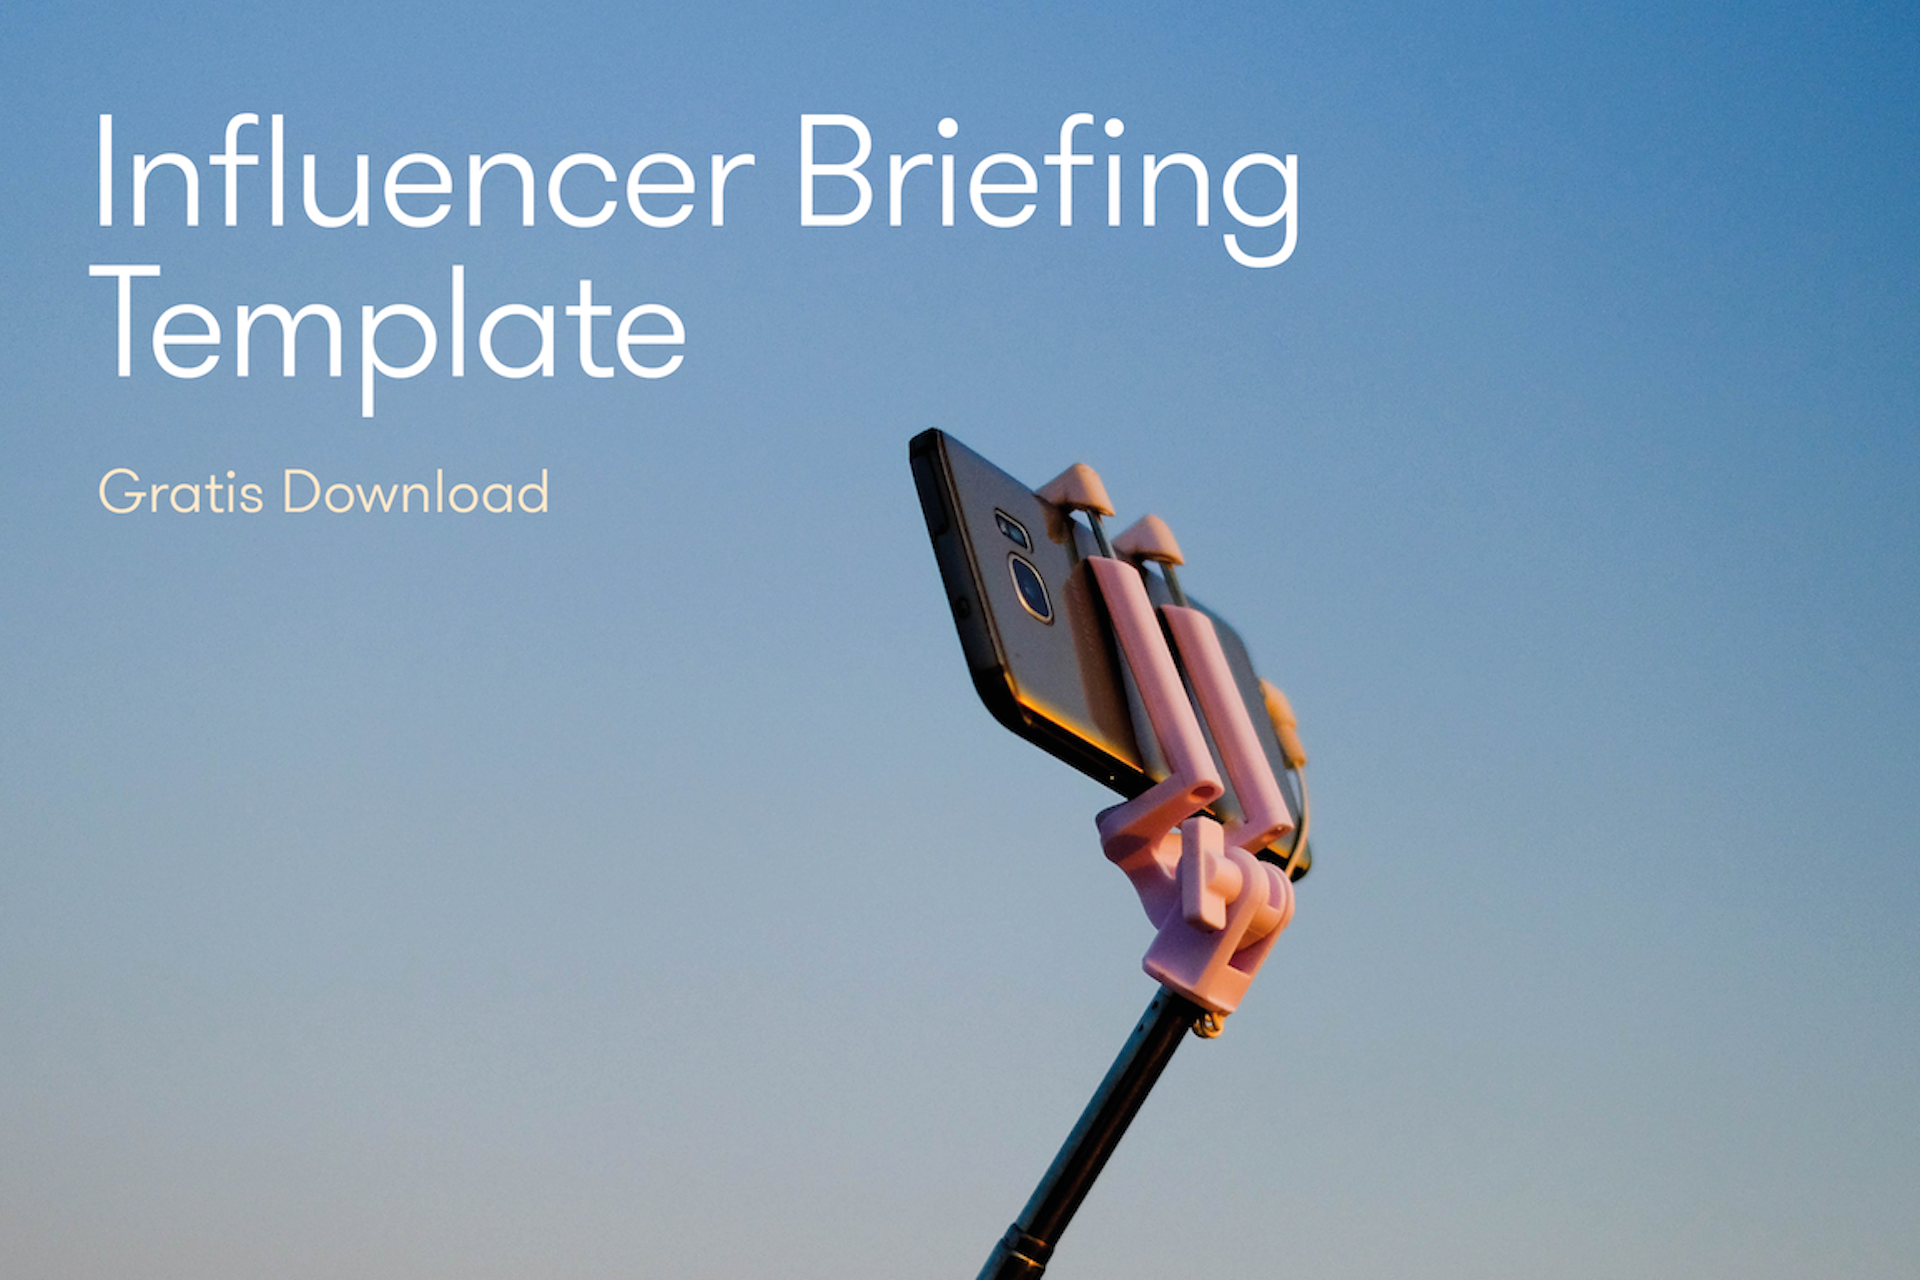 Influencer Briefing Template Cover